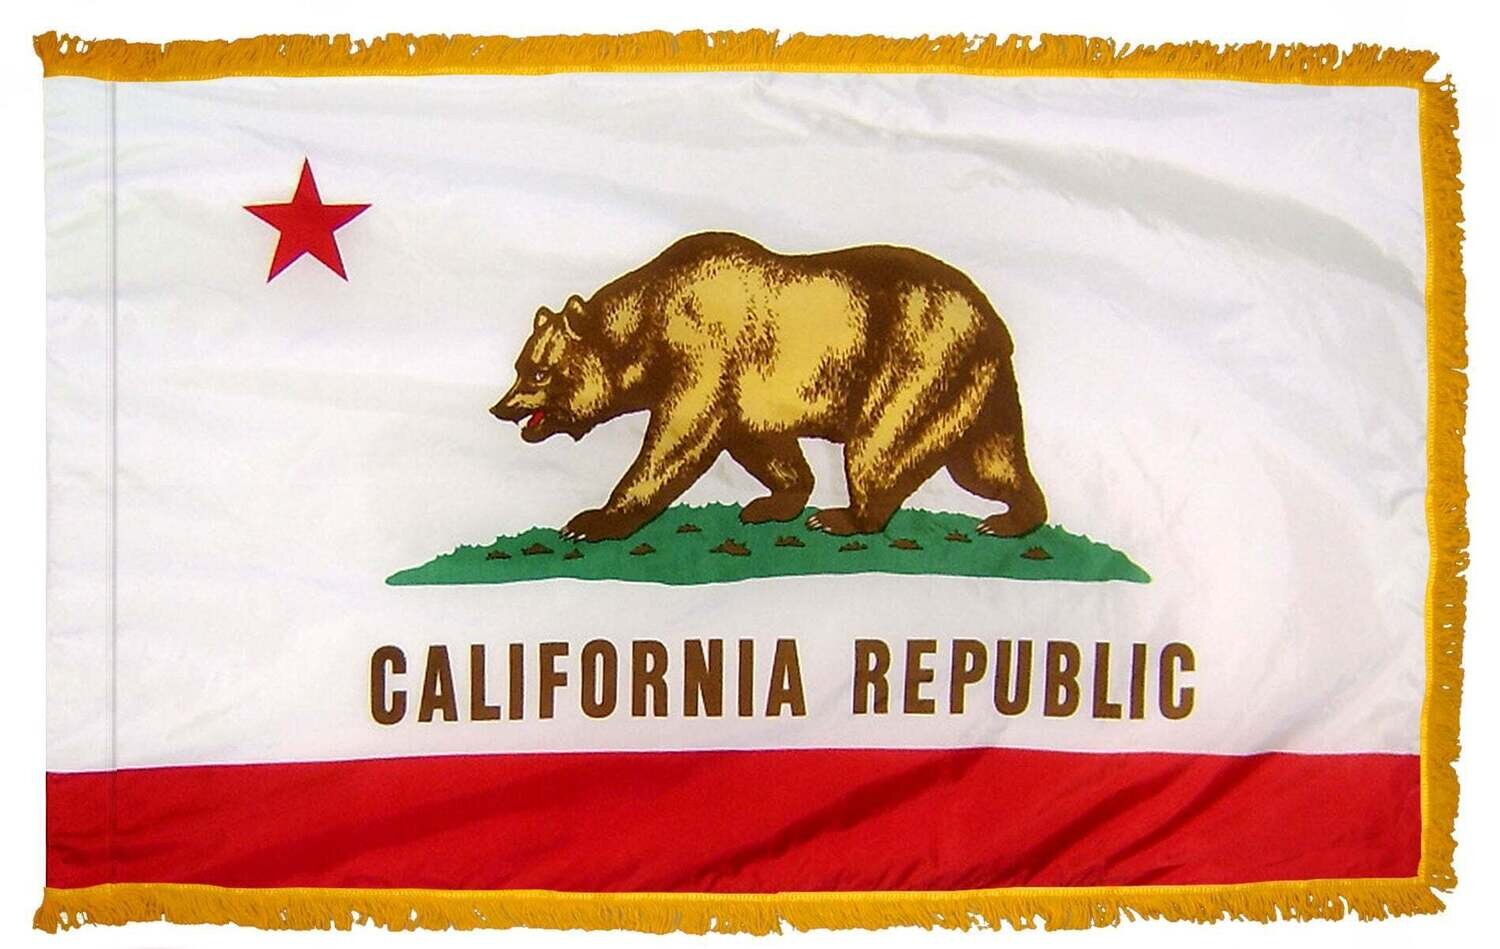 California State Flag 3x5 ft. Nylon with Pole Sleeve and Gold Fringe for Parades, and Indoor Display